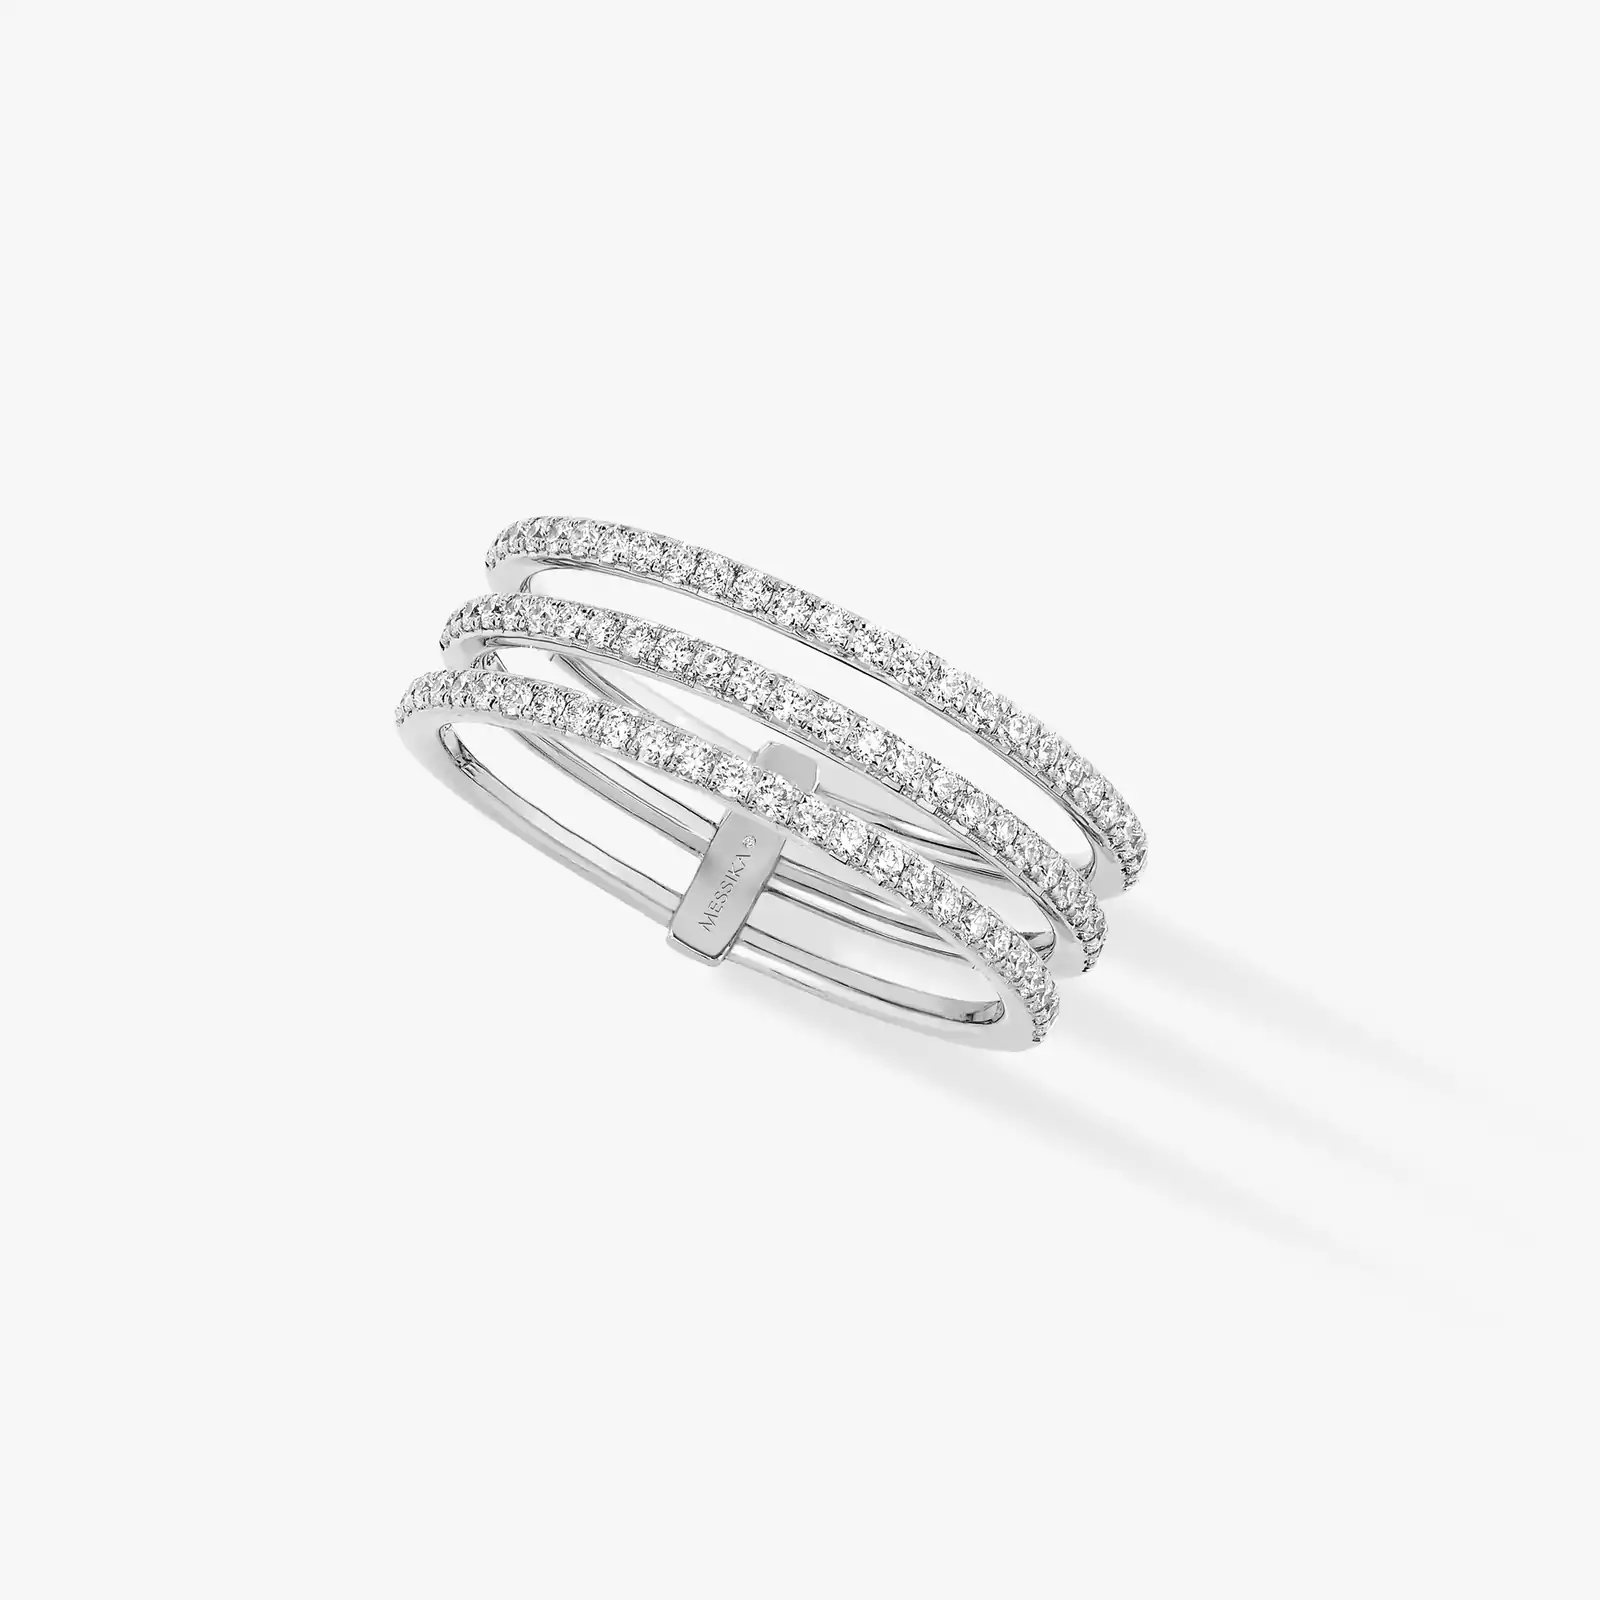 Gatsby 3 Rows White Gold For Her Diamond Ring 05439-WG